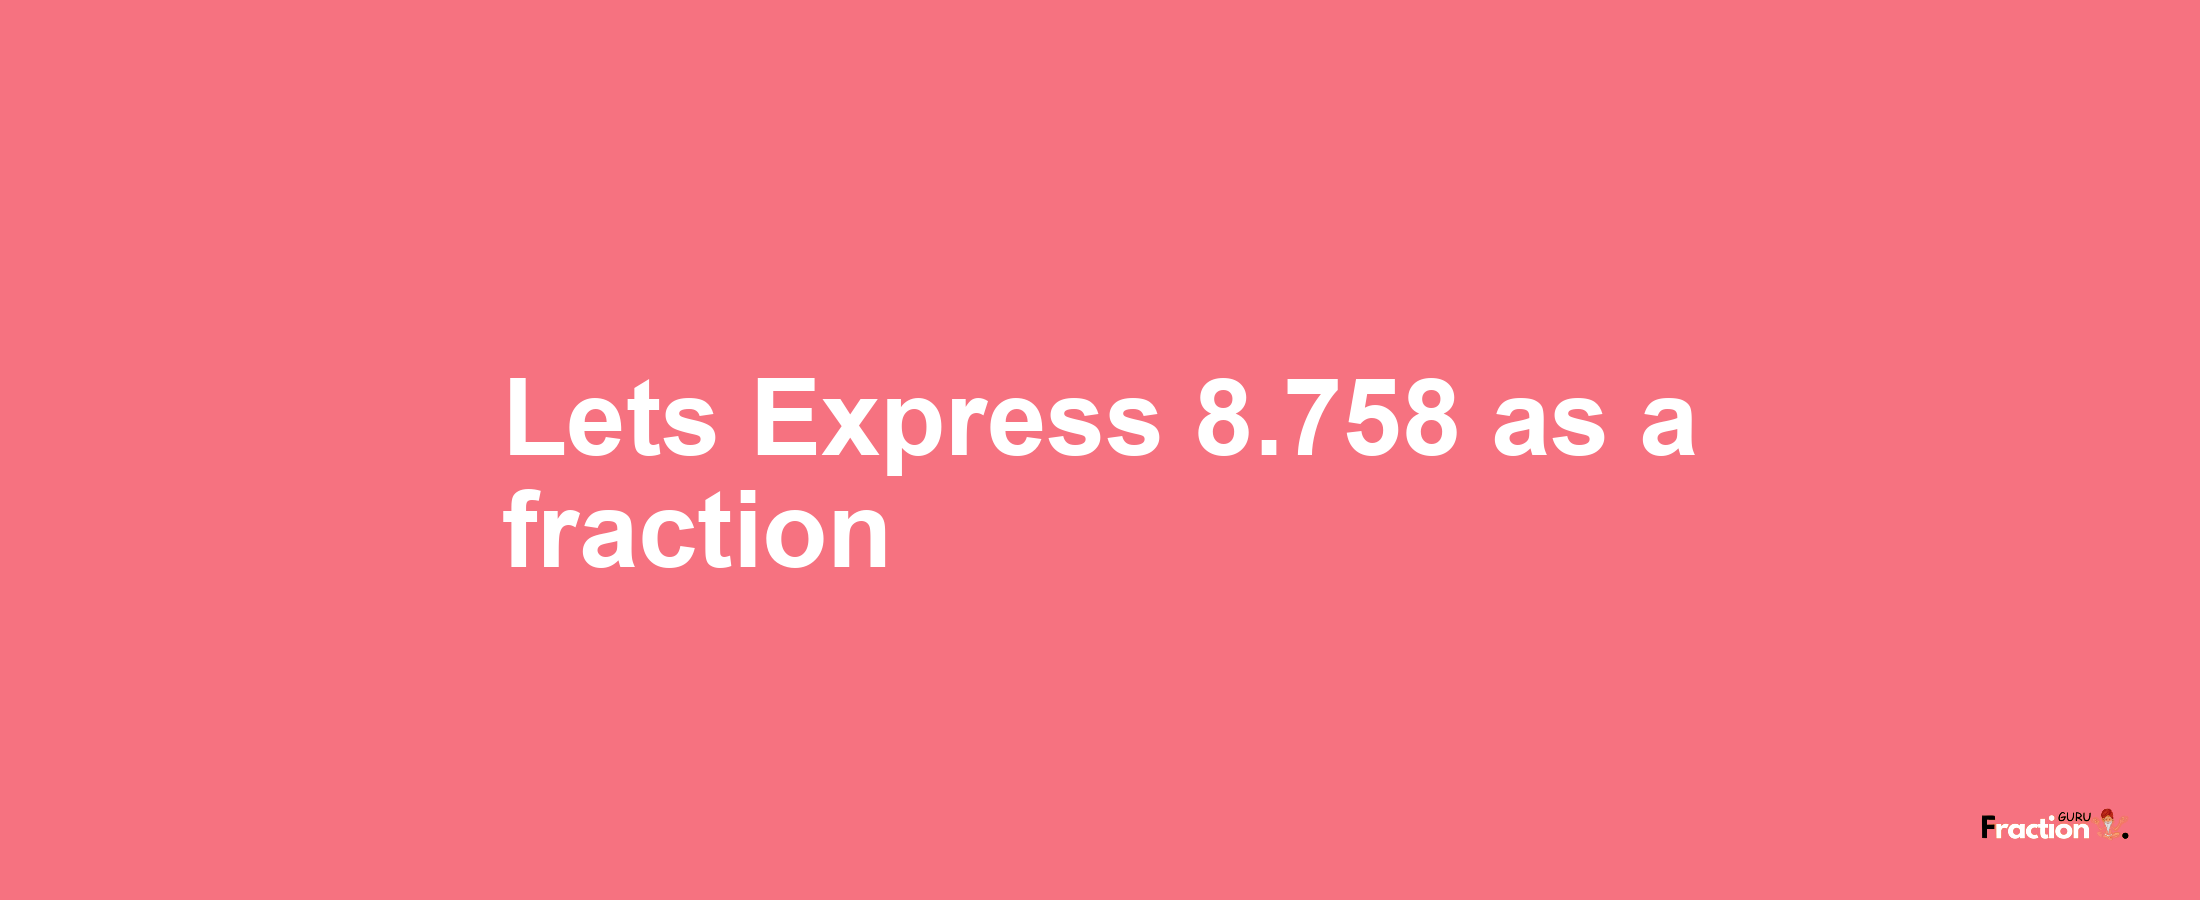 Lets Express 8.758 as afraction